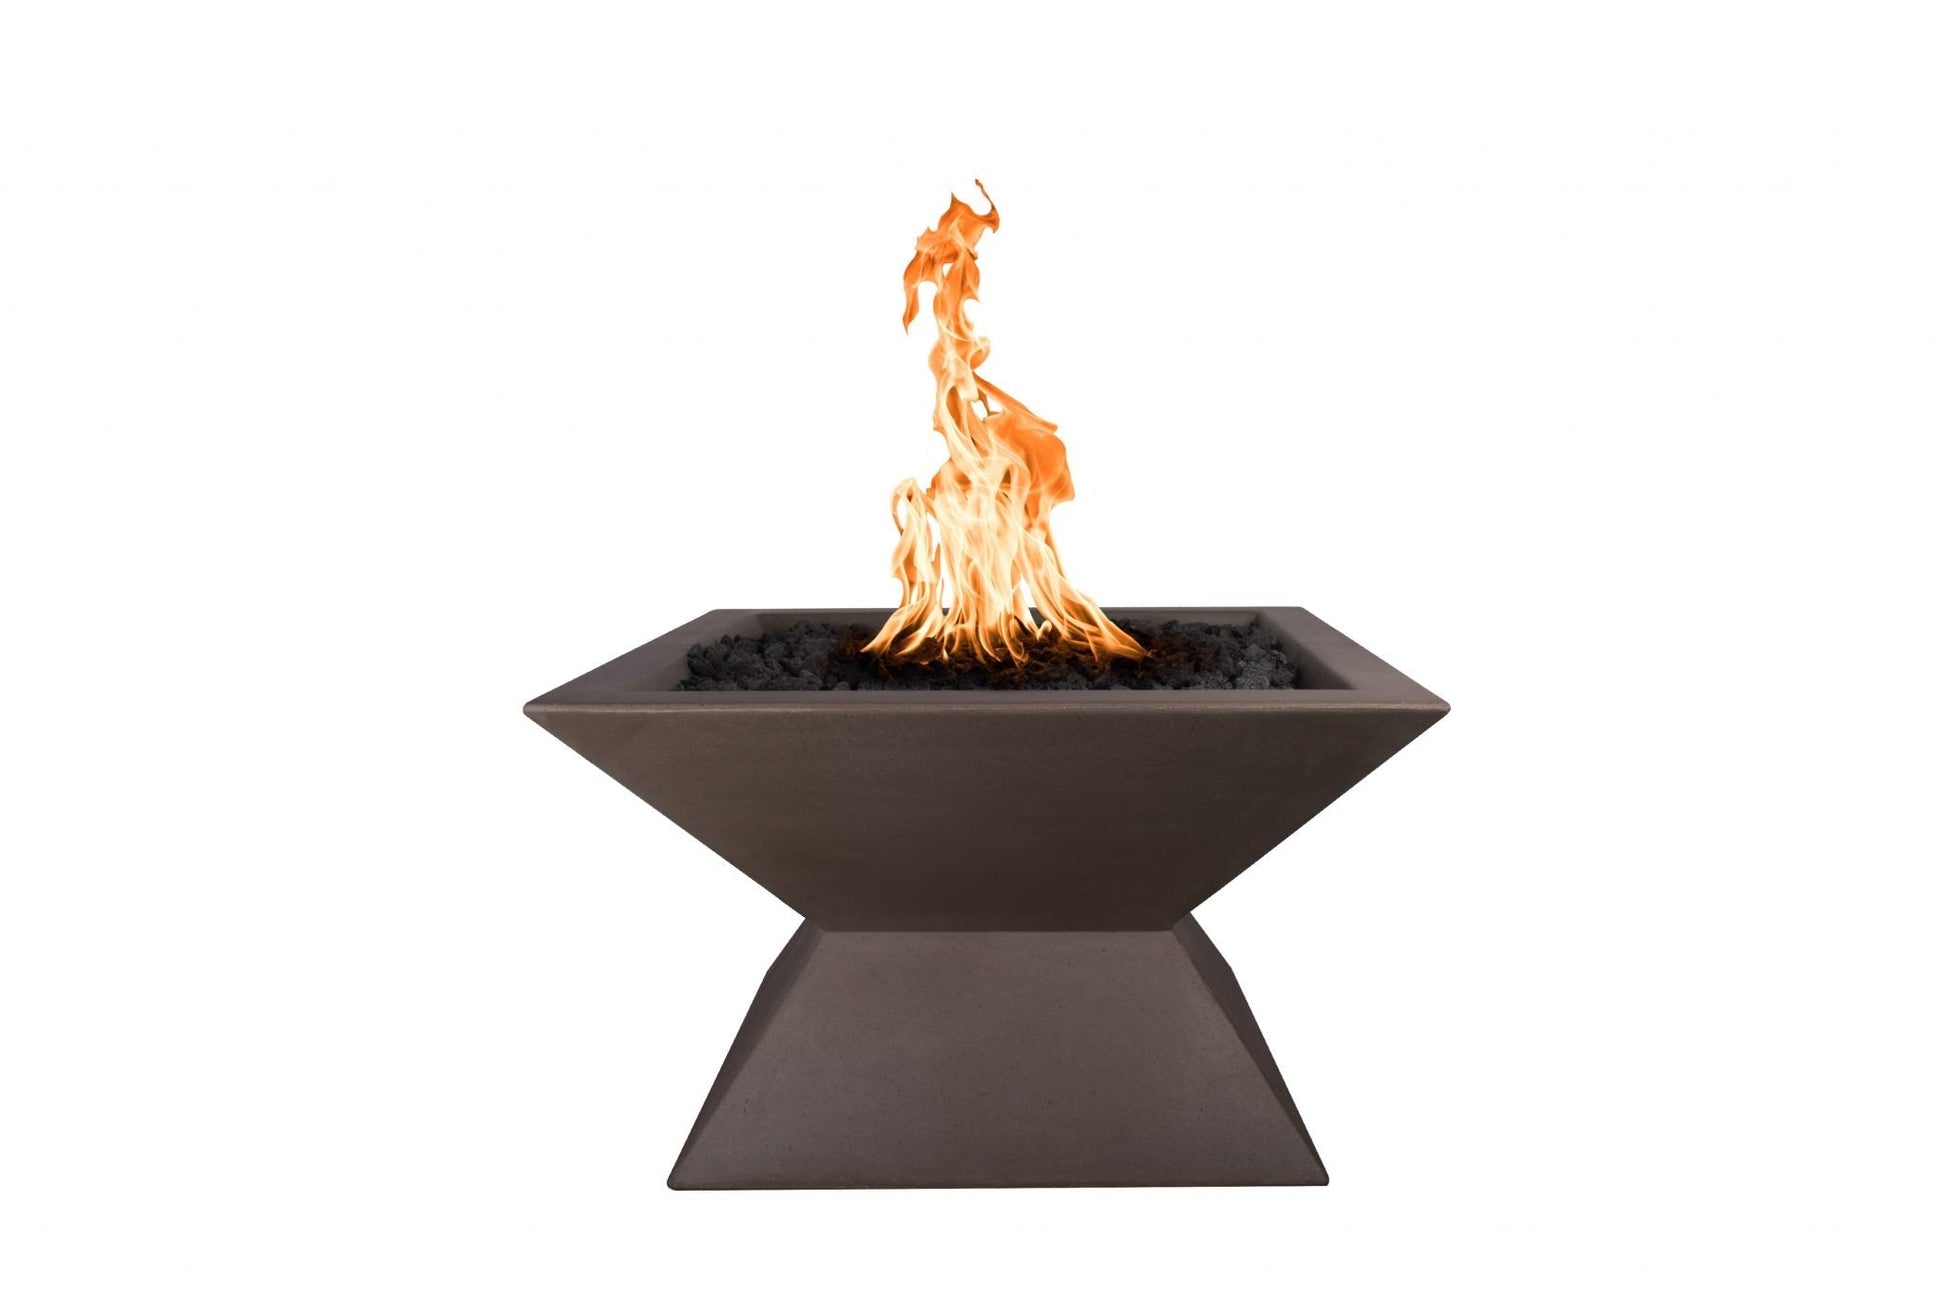 The Outdoor Plus Square Uxmal 30" Metallic Pearl GFRC Concrete Liquid Propane Fire Pit with 12V Electronic Ignition